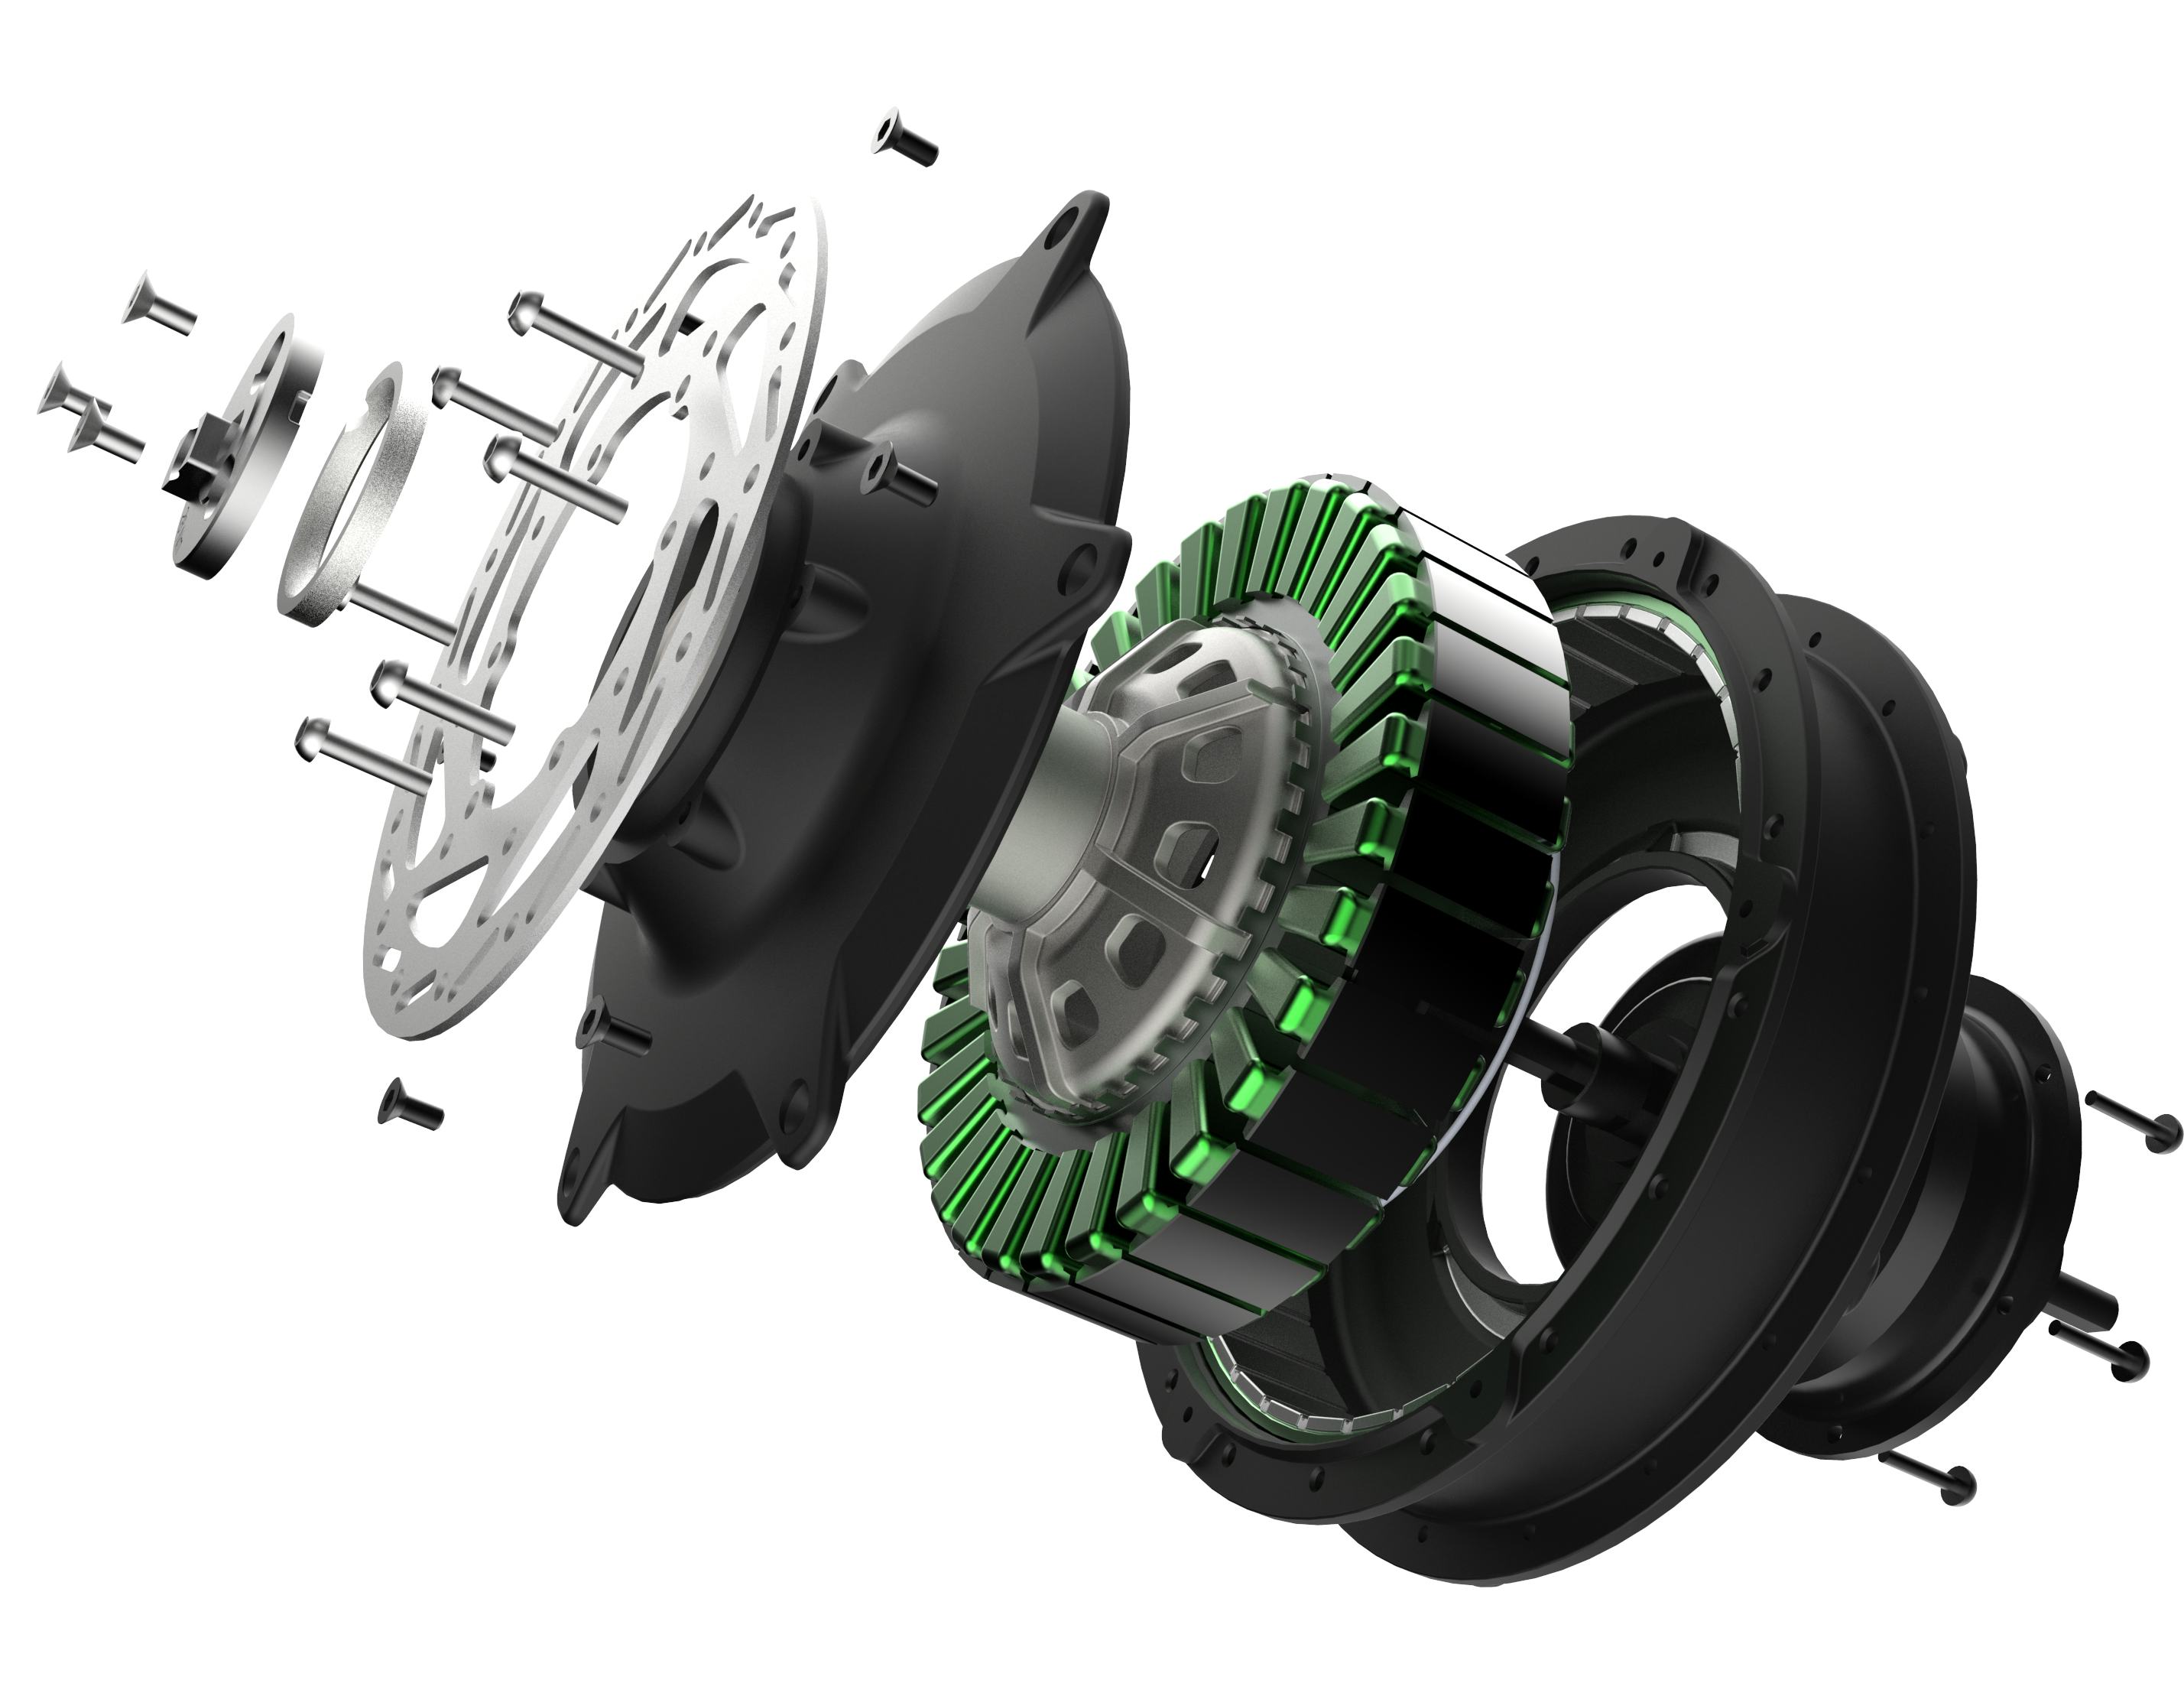 Exploded view of new e-bike motor. Sturmey-Archer’s 5-speed IHG is shown at right side in front of three mounting bolts. – Photo Accell